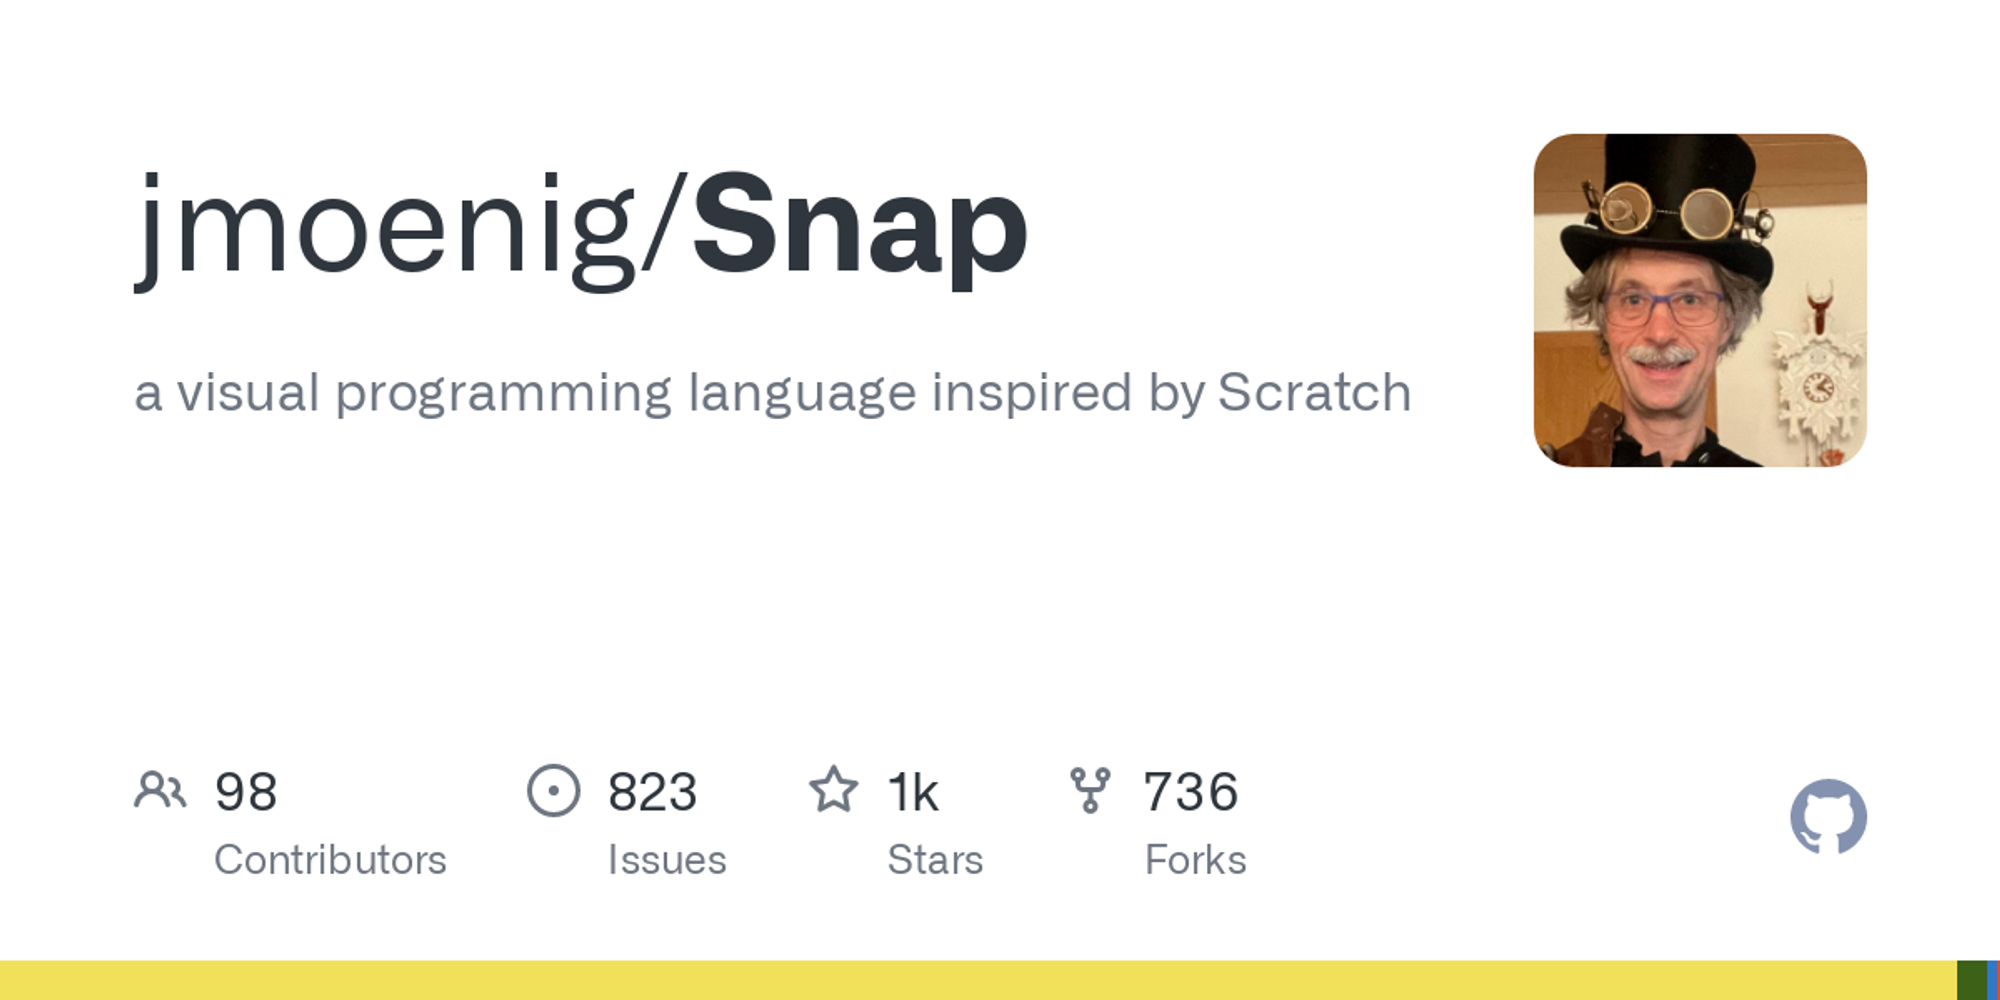 GitHub - jmoenig/Snap: a visual programming language inspired by Scratch